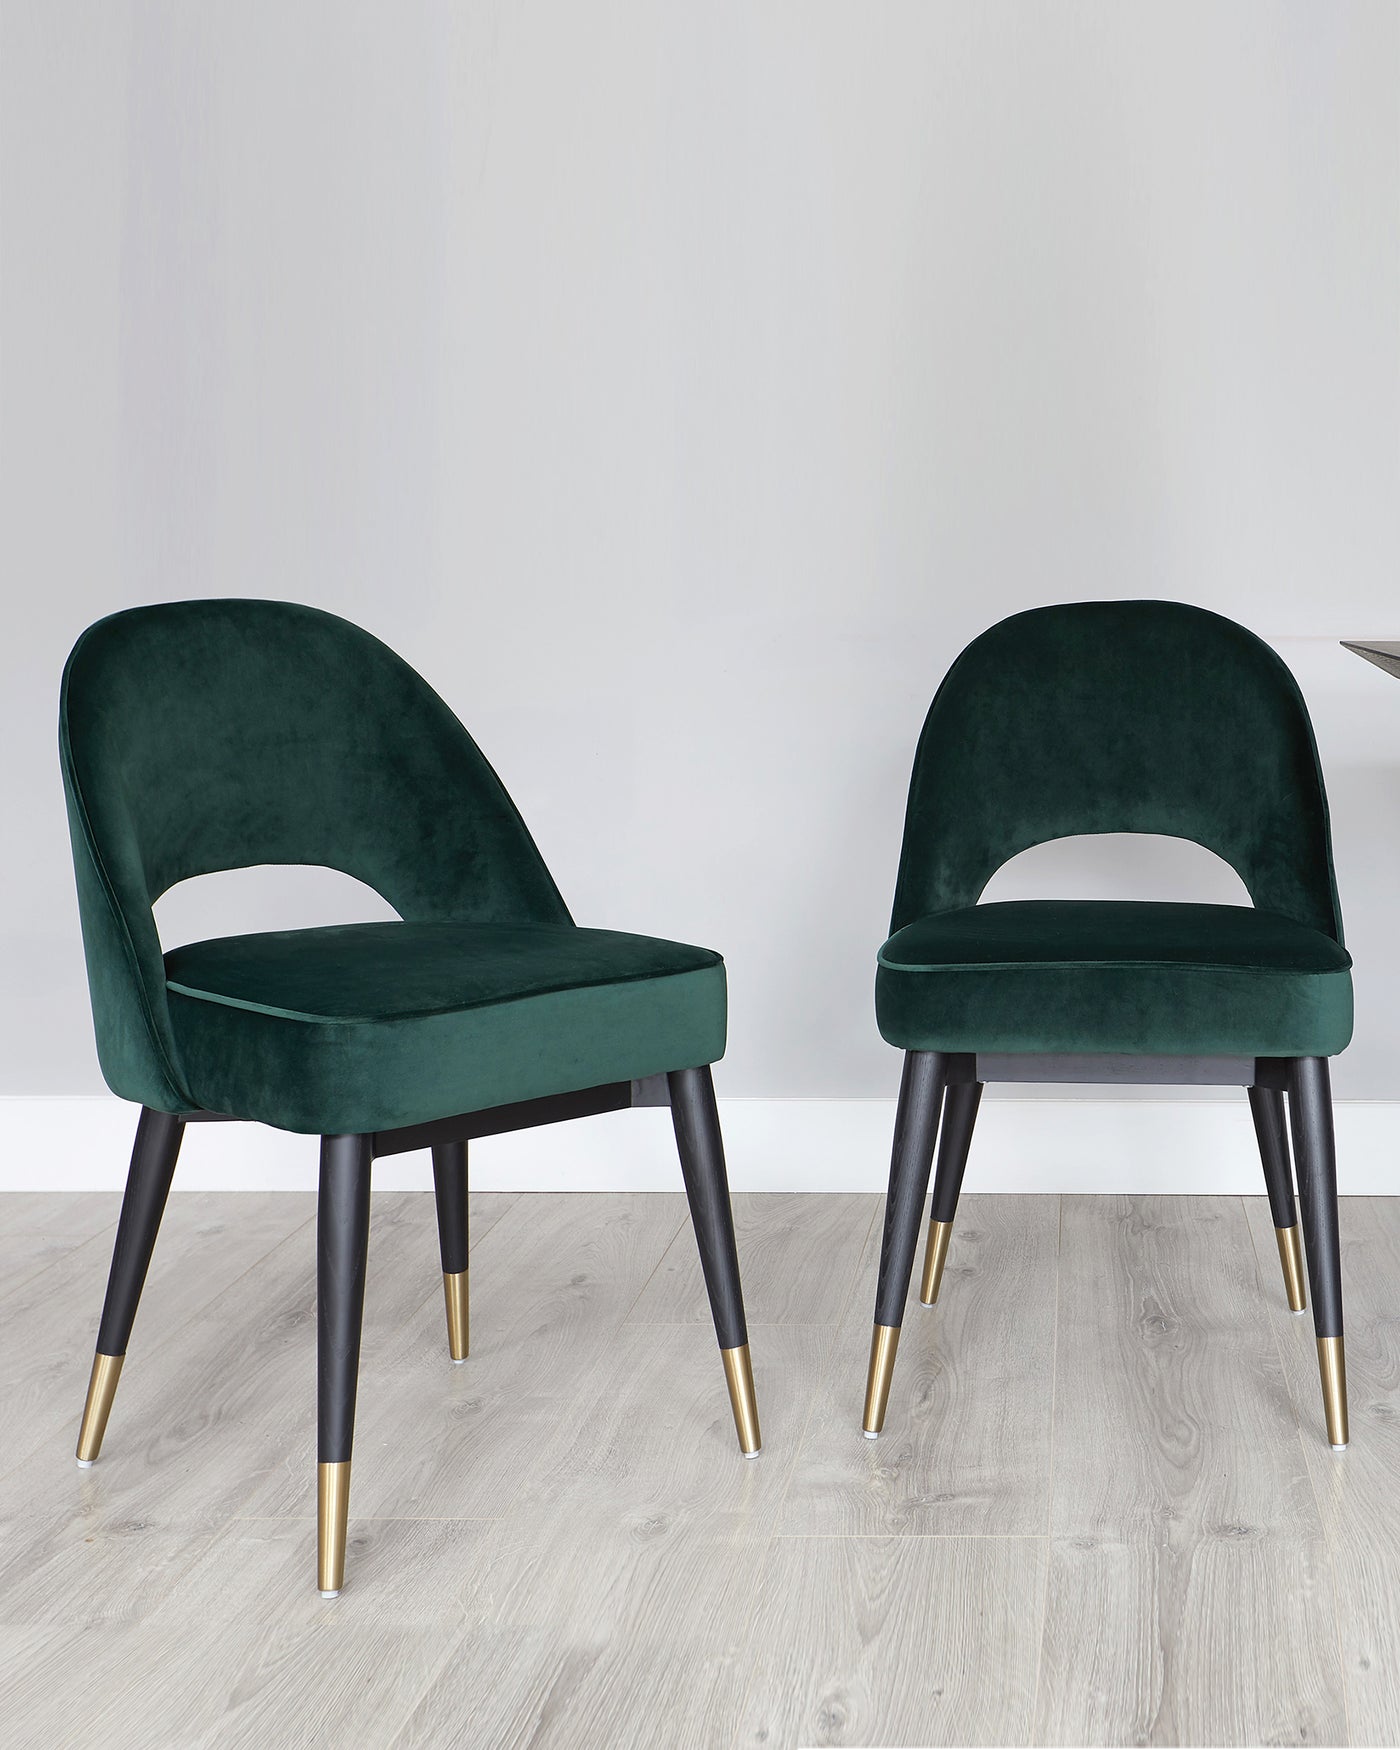 Two modern-style velvet dining chairs in dark green with a curved backrest design and cut-out. The chairs have angled black wooden legs with gold metal tips. The setting is a simple room with light wooden flooring and a plain white wall in the background.